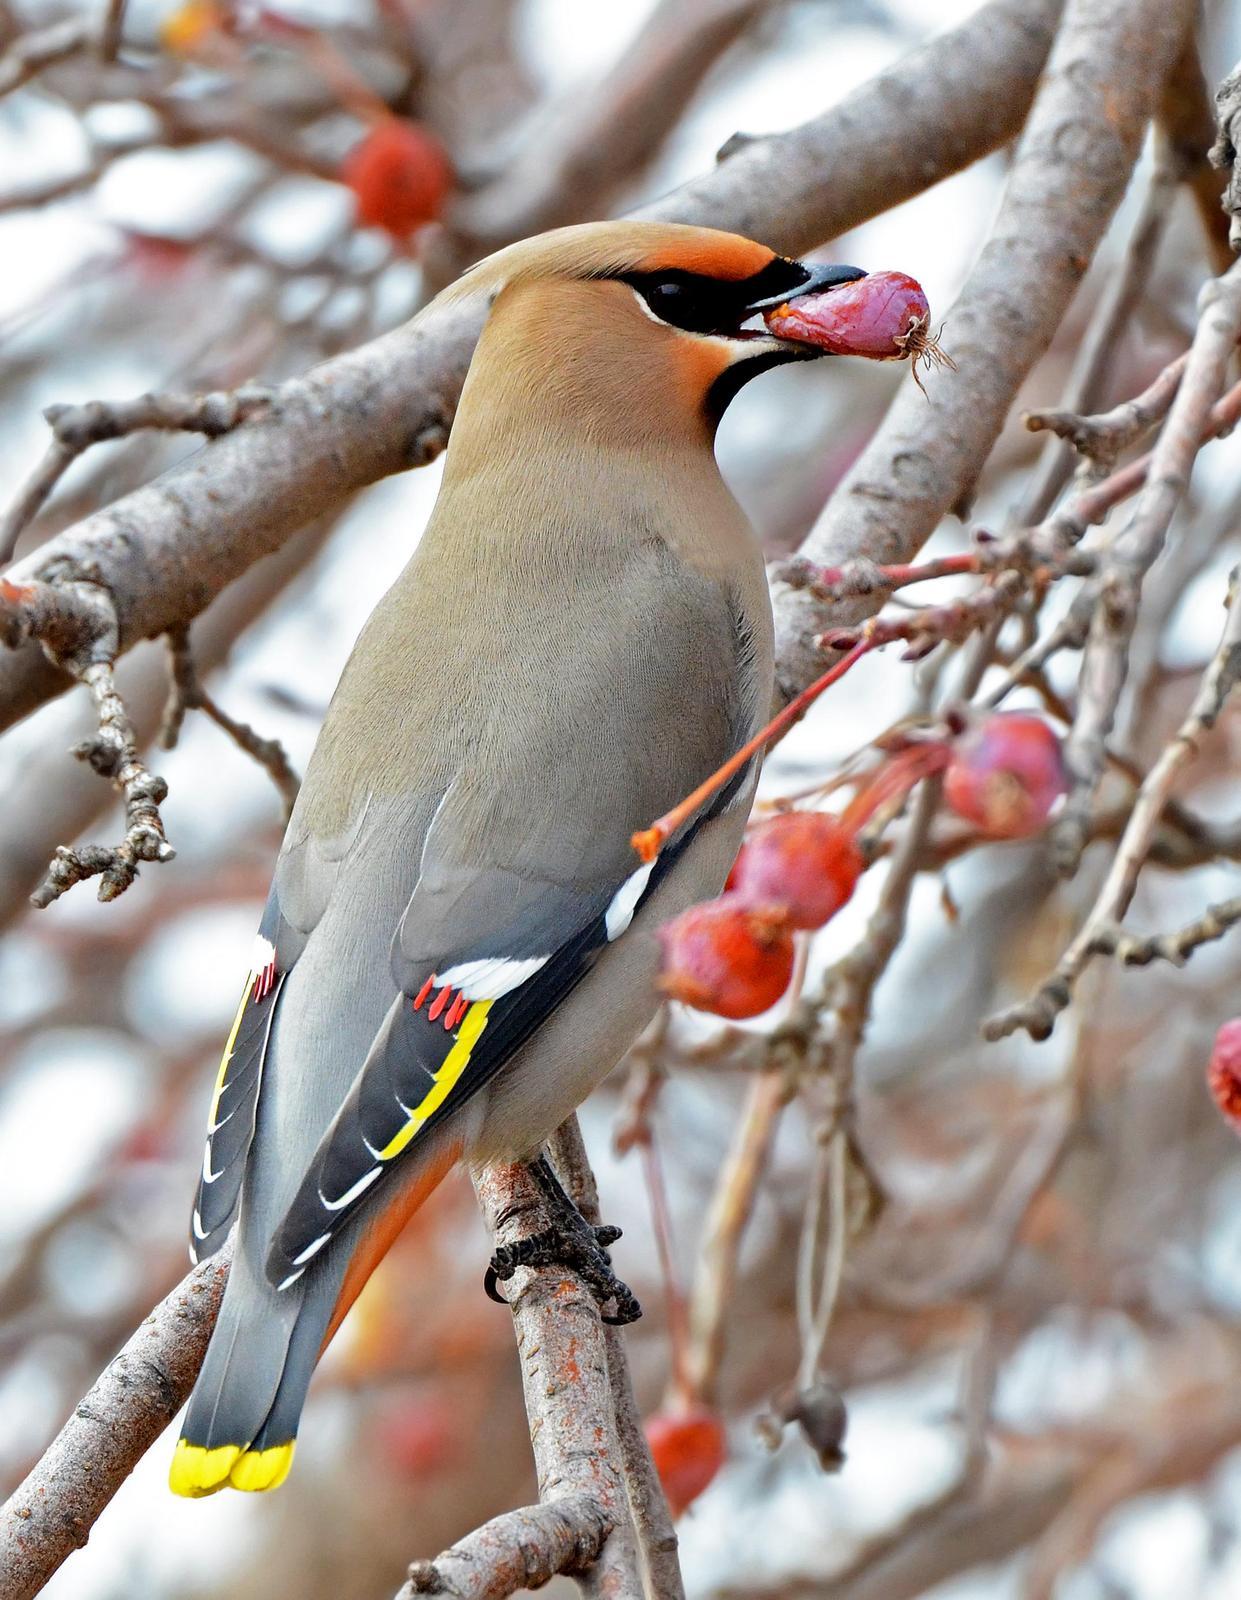 Bohemian Waxwing Photo by Steven Mlodinow